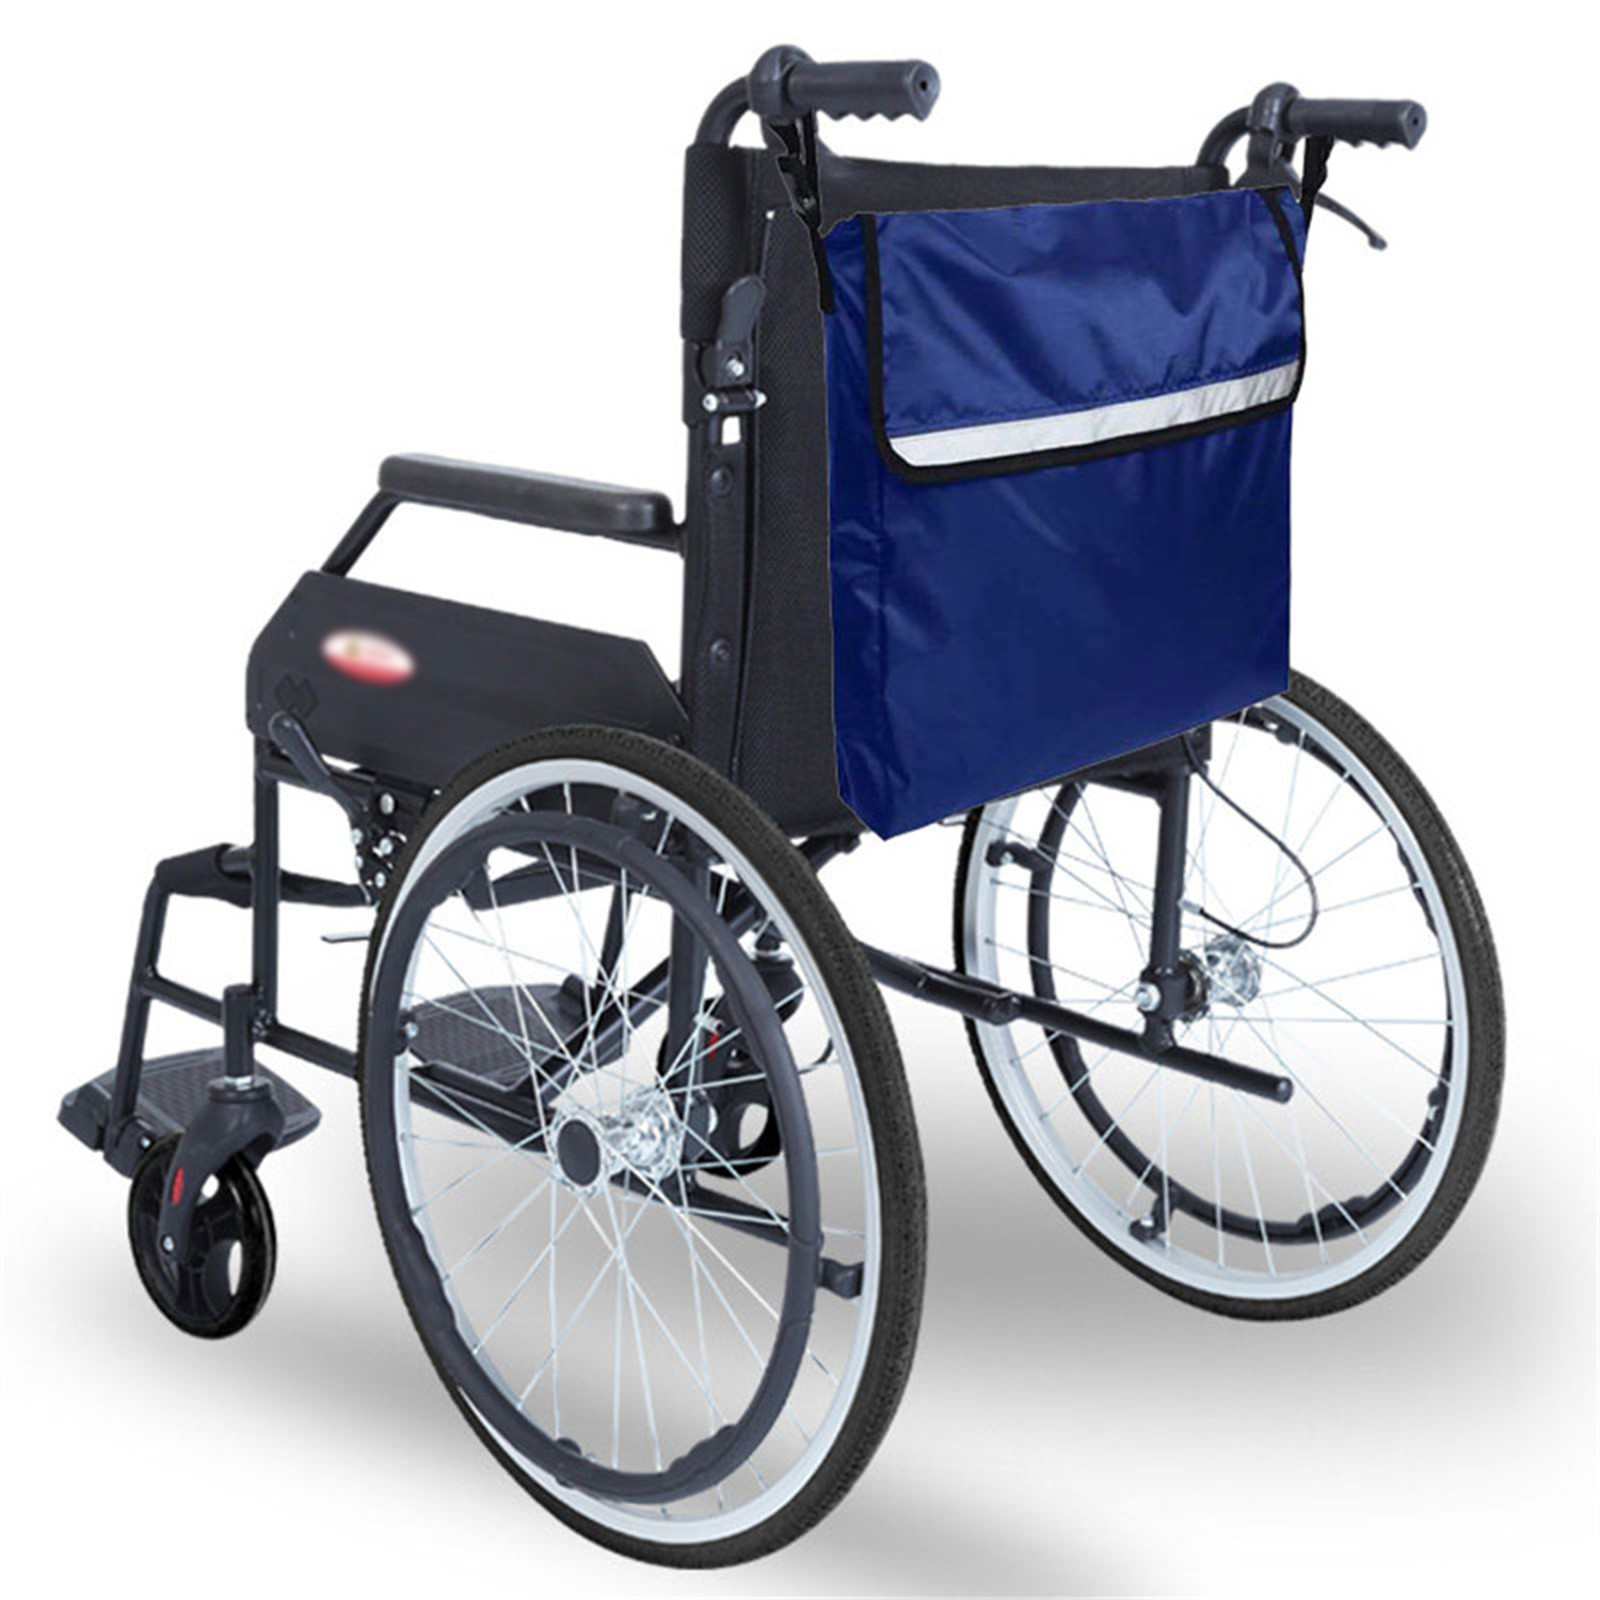 Wheelchair Backpack For Back Of Chair - Wheelchair Bag For Walker ...